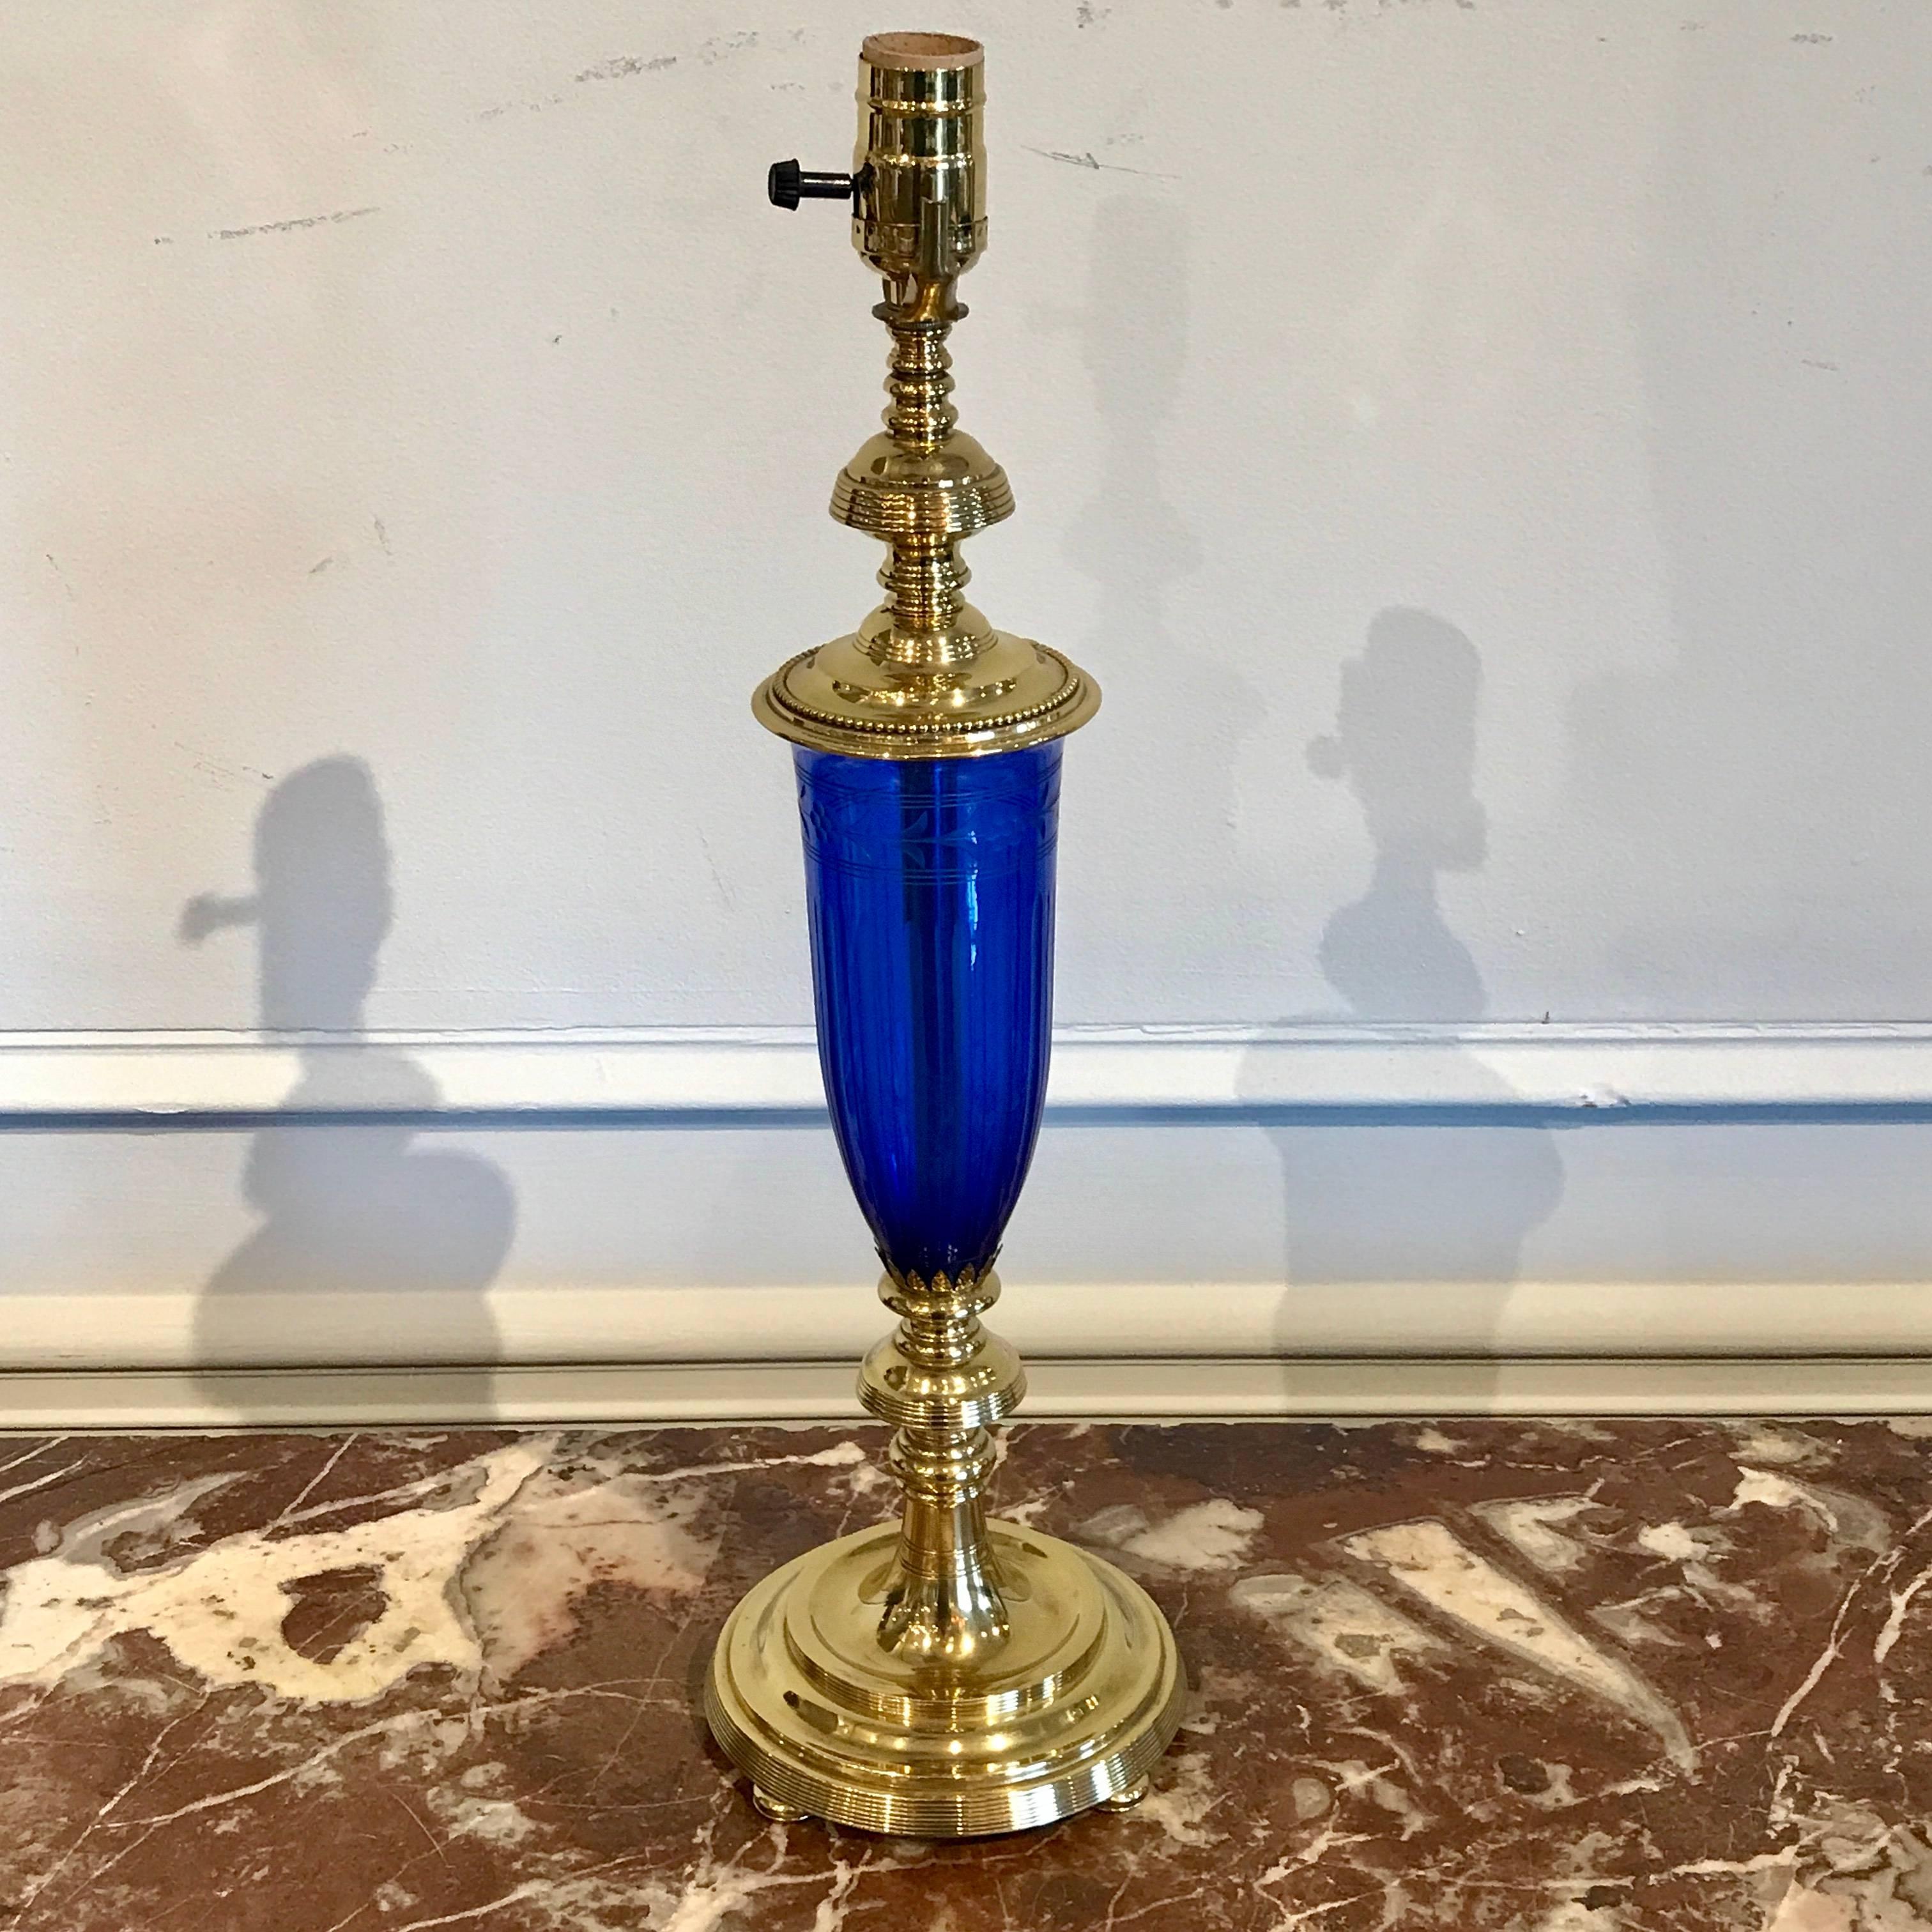 American Pair of Cobalt Blue and Brass-Mounted Urn Lamps by Pairpoint